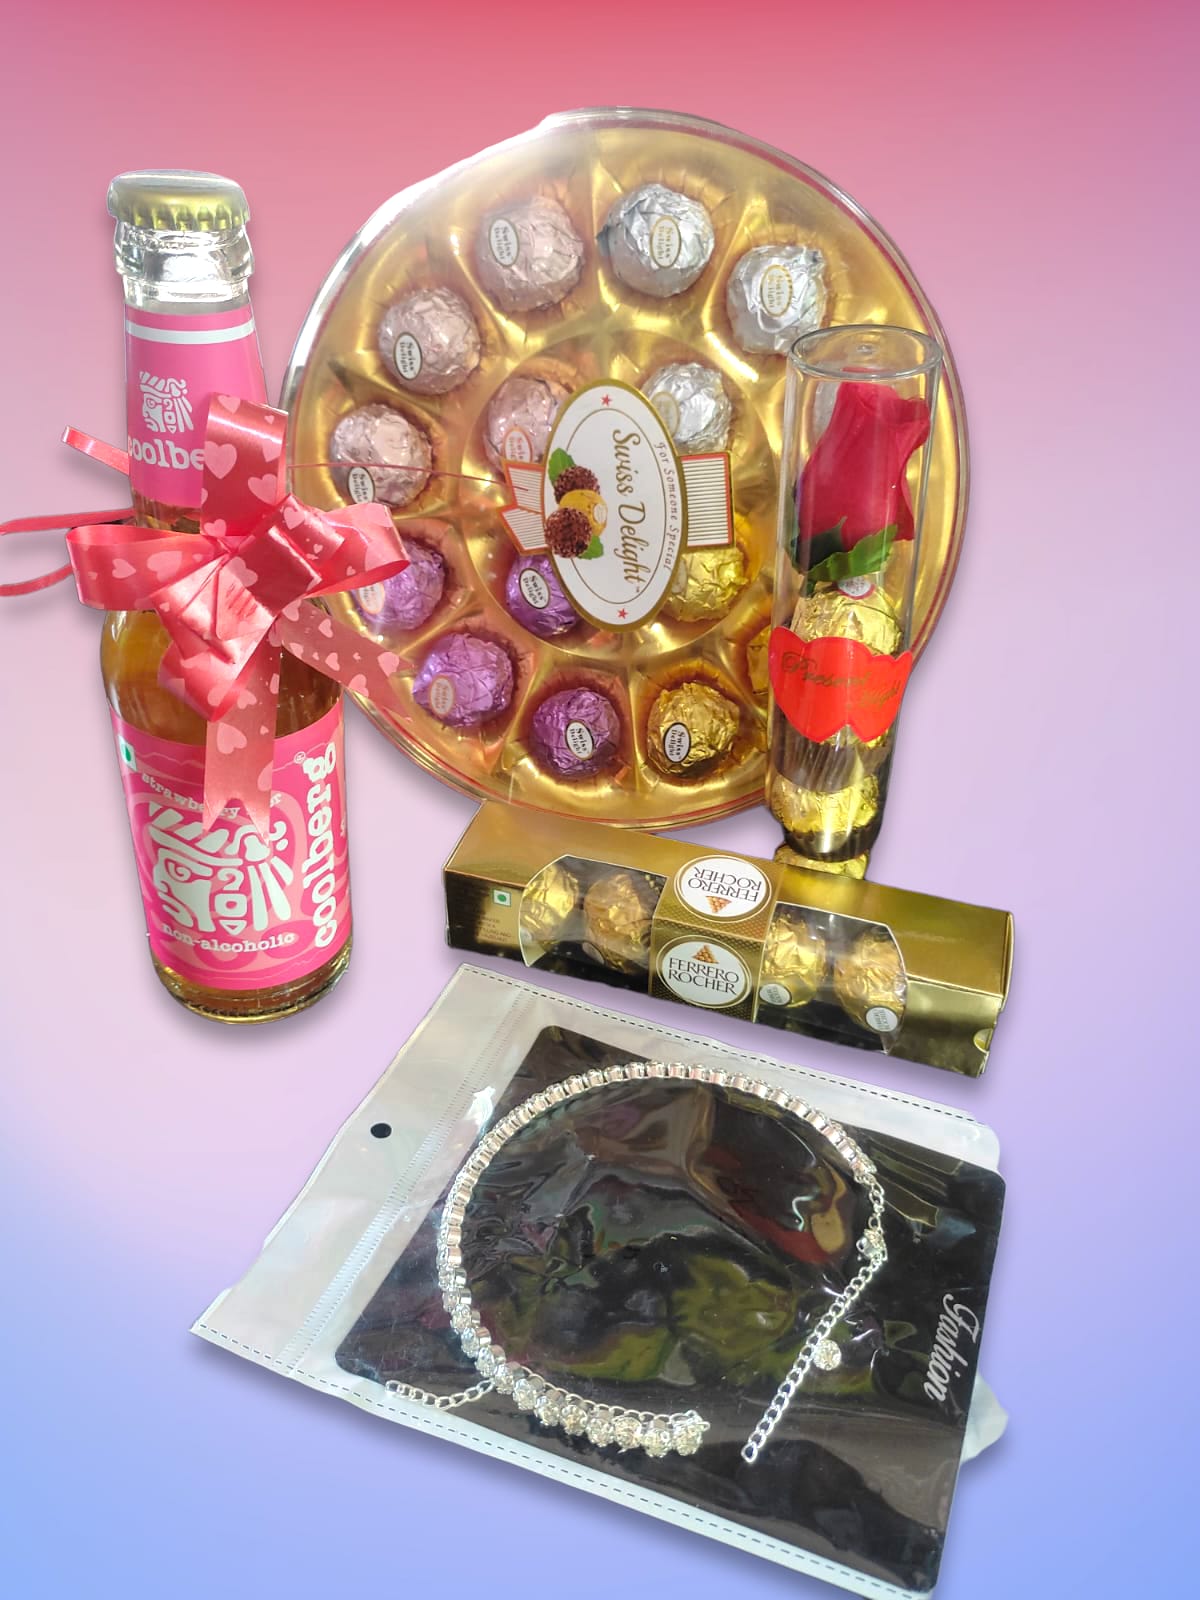 Gift Hamper of Love Gifts N Red Roses Chocolate with Chocolate Heart Shape Cake